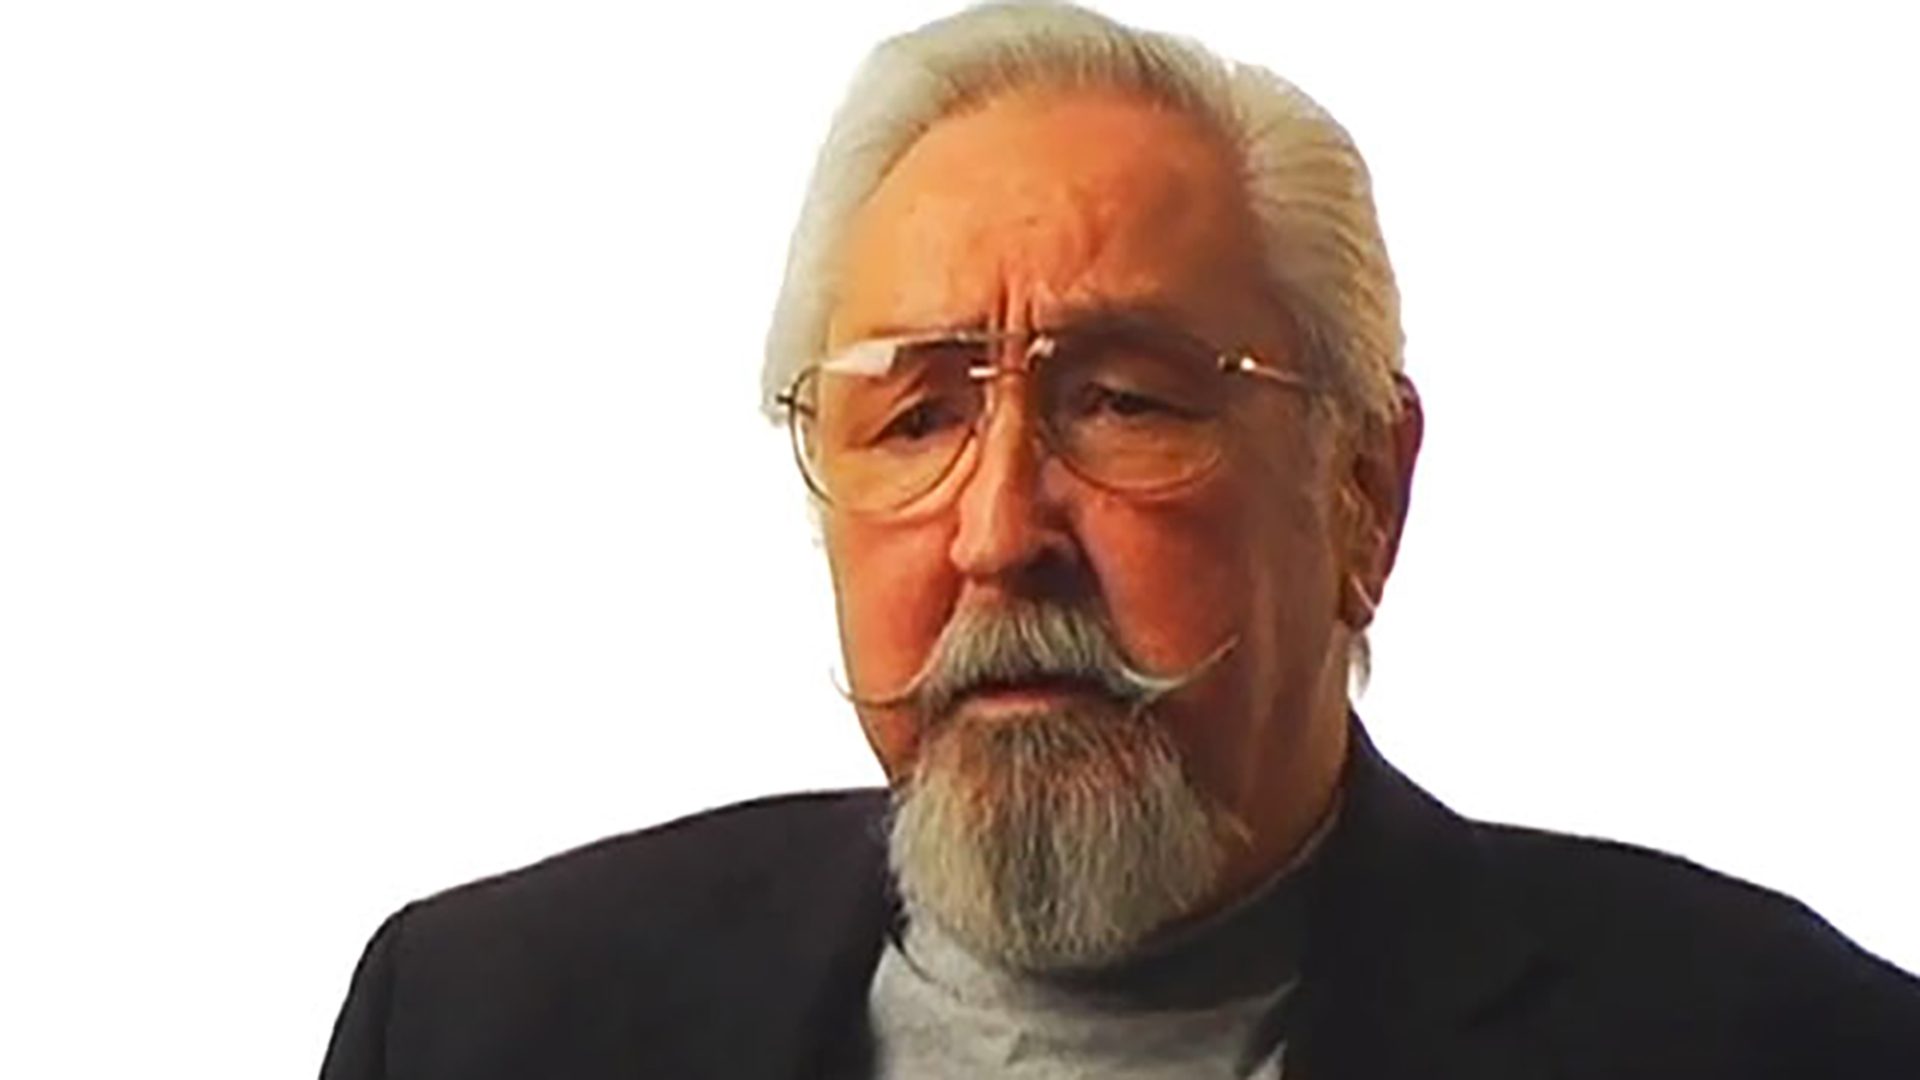 A senior man with glasses and facial hair is interviewed against a white background.